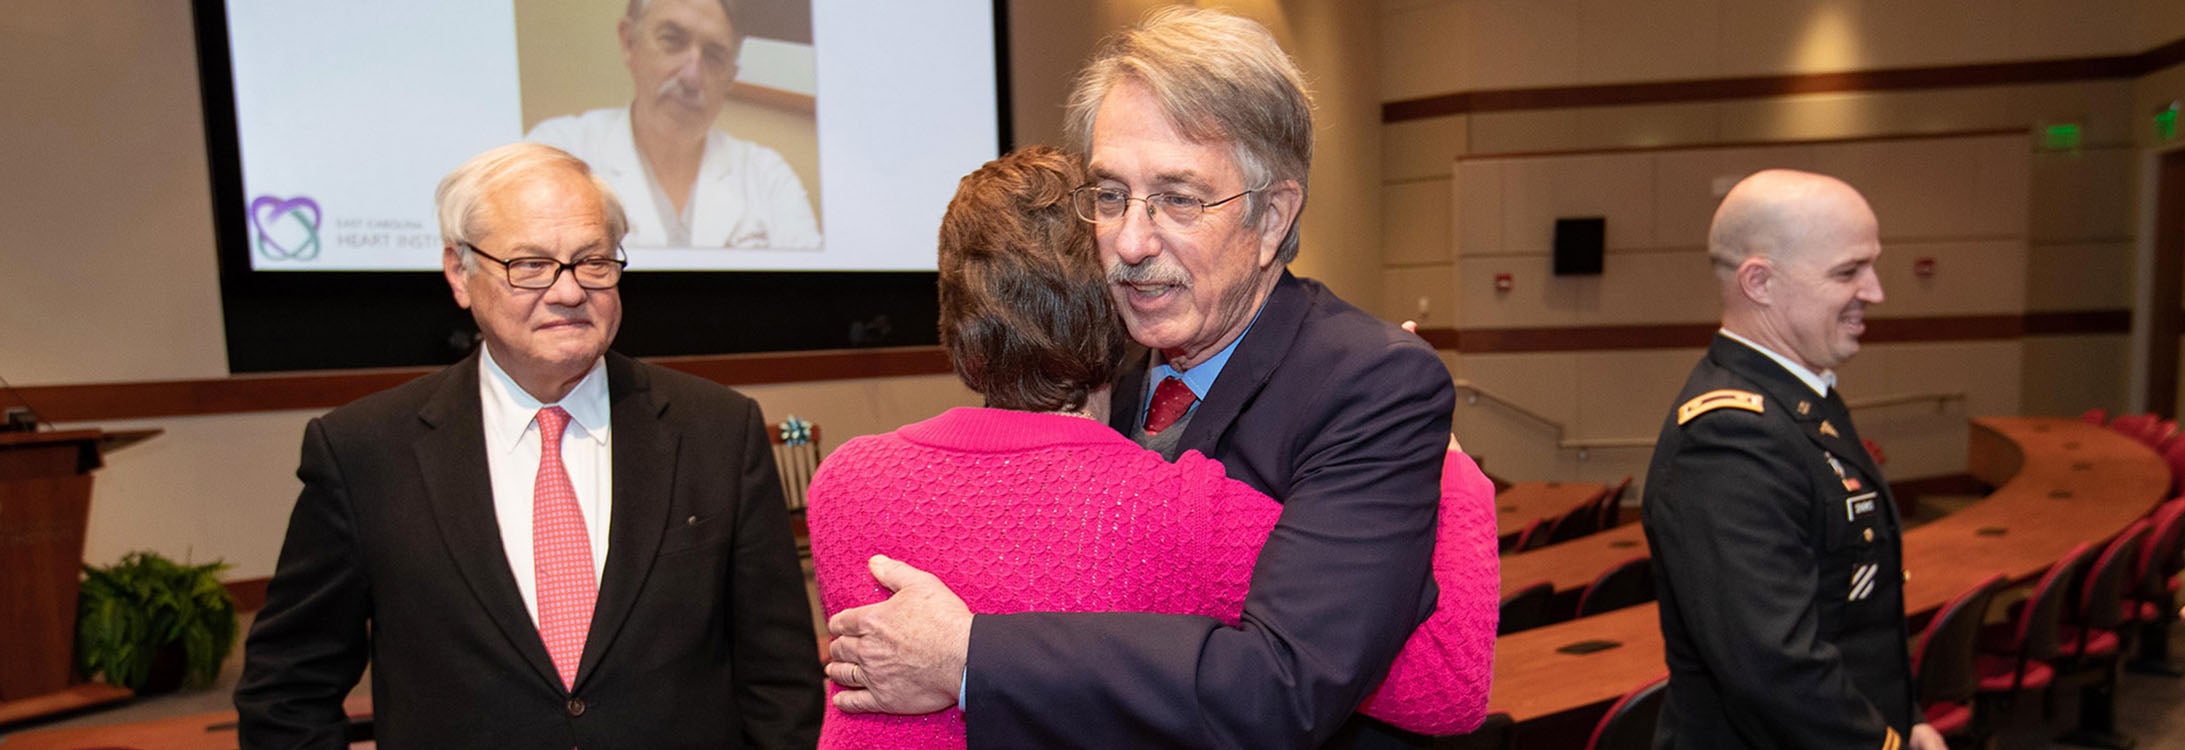 Dr. Mark Williams shares a hug with a friend after a ceremony for the establishment of the Travis and Cassandra Burt Professorship in Cardiovascular Sciences at the ECHI, as Dr. Randolph Chitwood, left, the founder and former head of ECHI, looks on. (Photos by Rhett Butler)